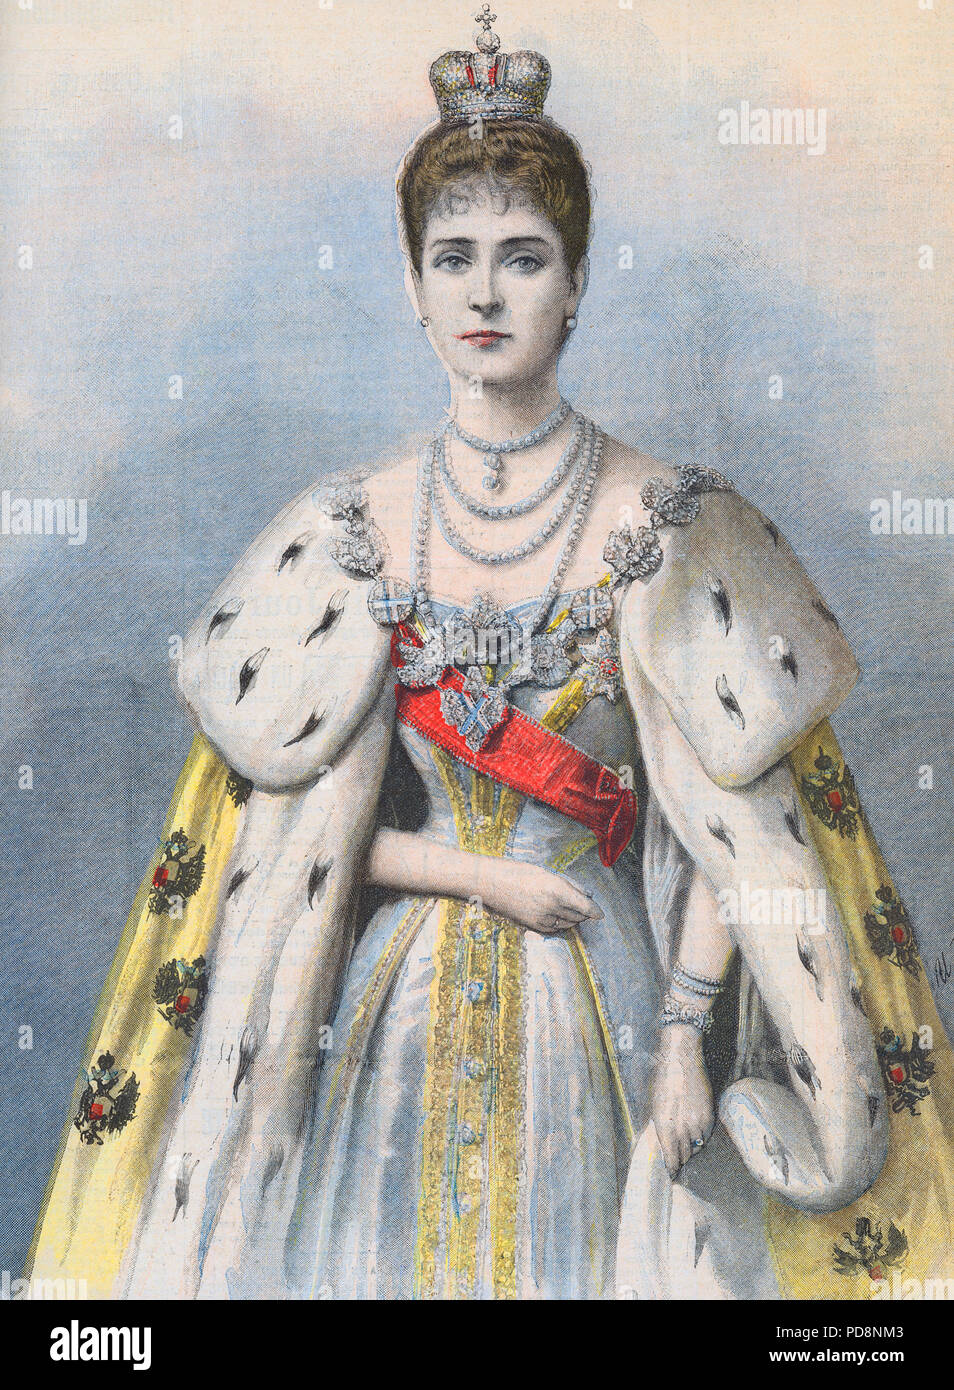 Tsar Nicholas II of Russia. 1868-1918. The last emperor of Russia. Pictured here his wife Empress Alexandra. 1872-1918. Illustration from Le Petit Journal 24 May 1896 in connection with their coronation in Moscow 1986. Stock Photo